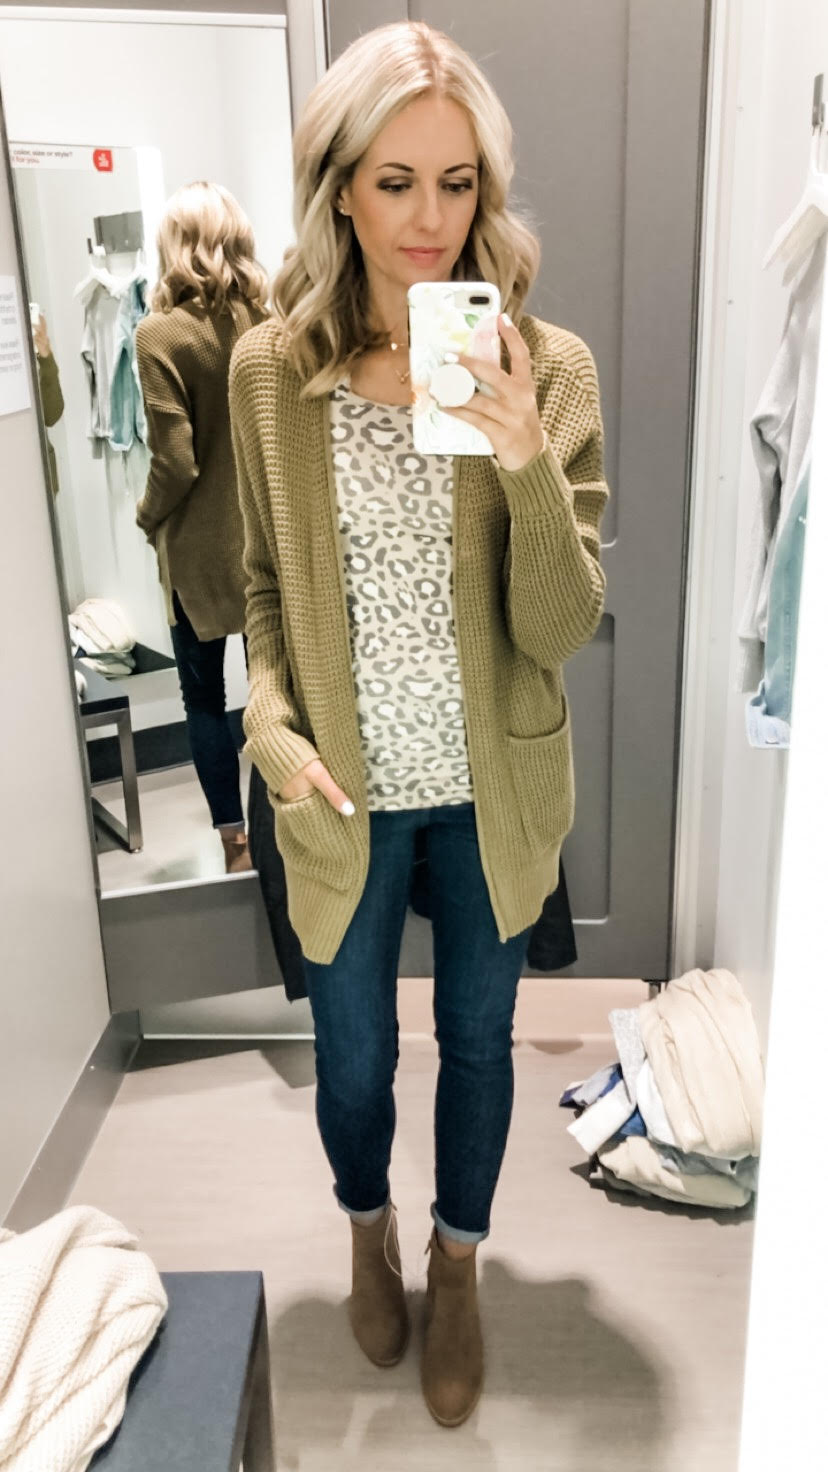 Target Fall Clothes Try On | August 2019 — Megan Ward Fashion Beauty ...